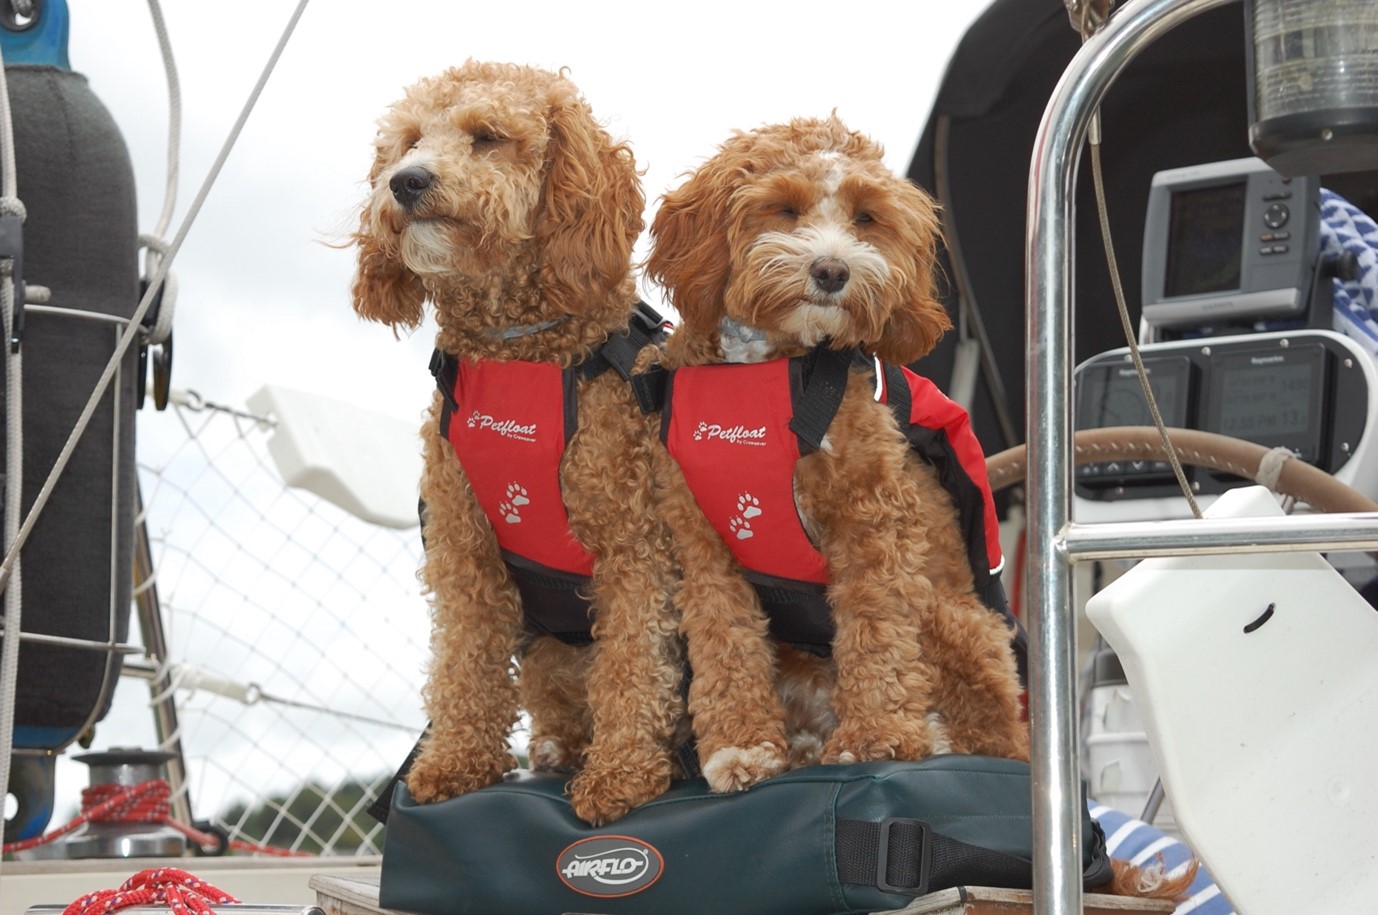 Two dogs on a yacht wearing life jackets